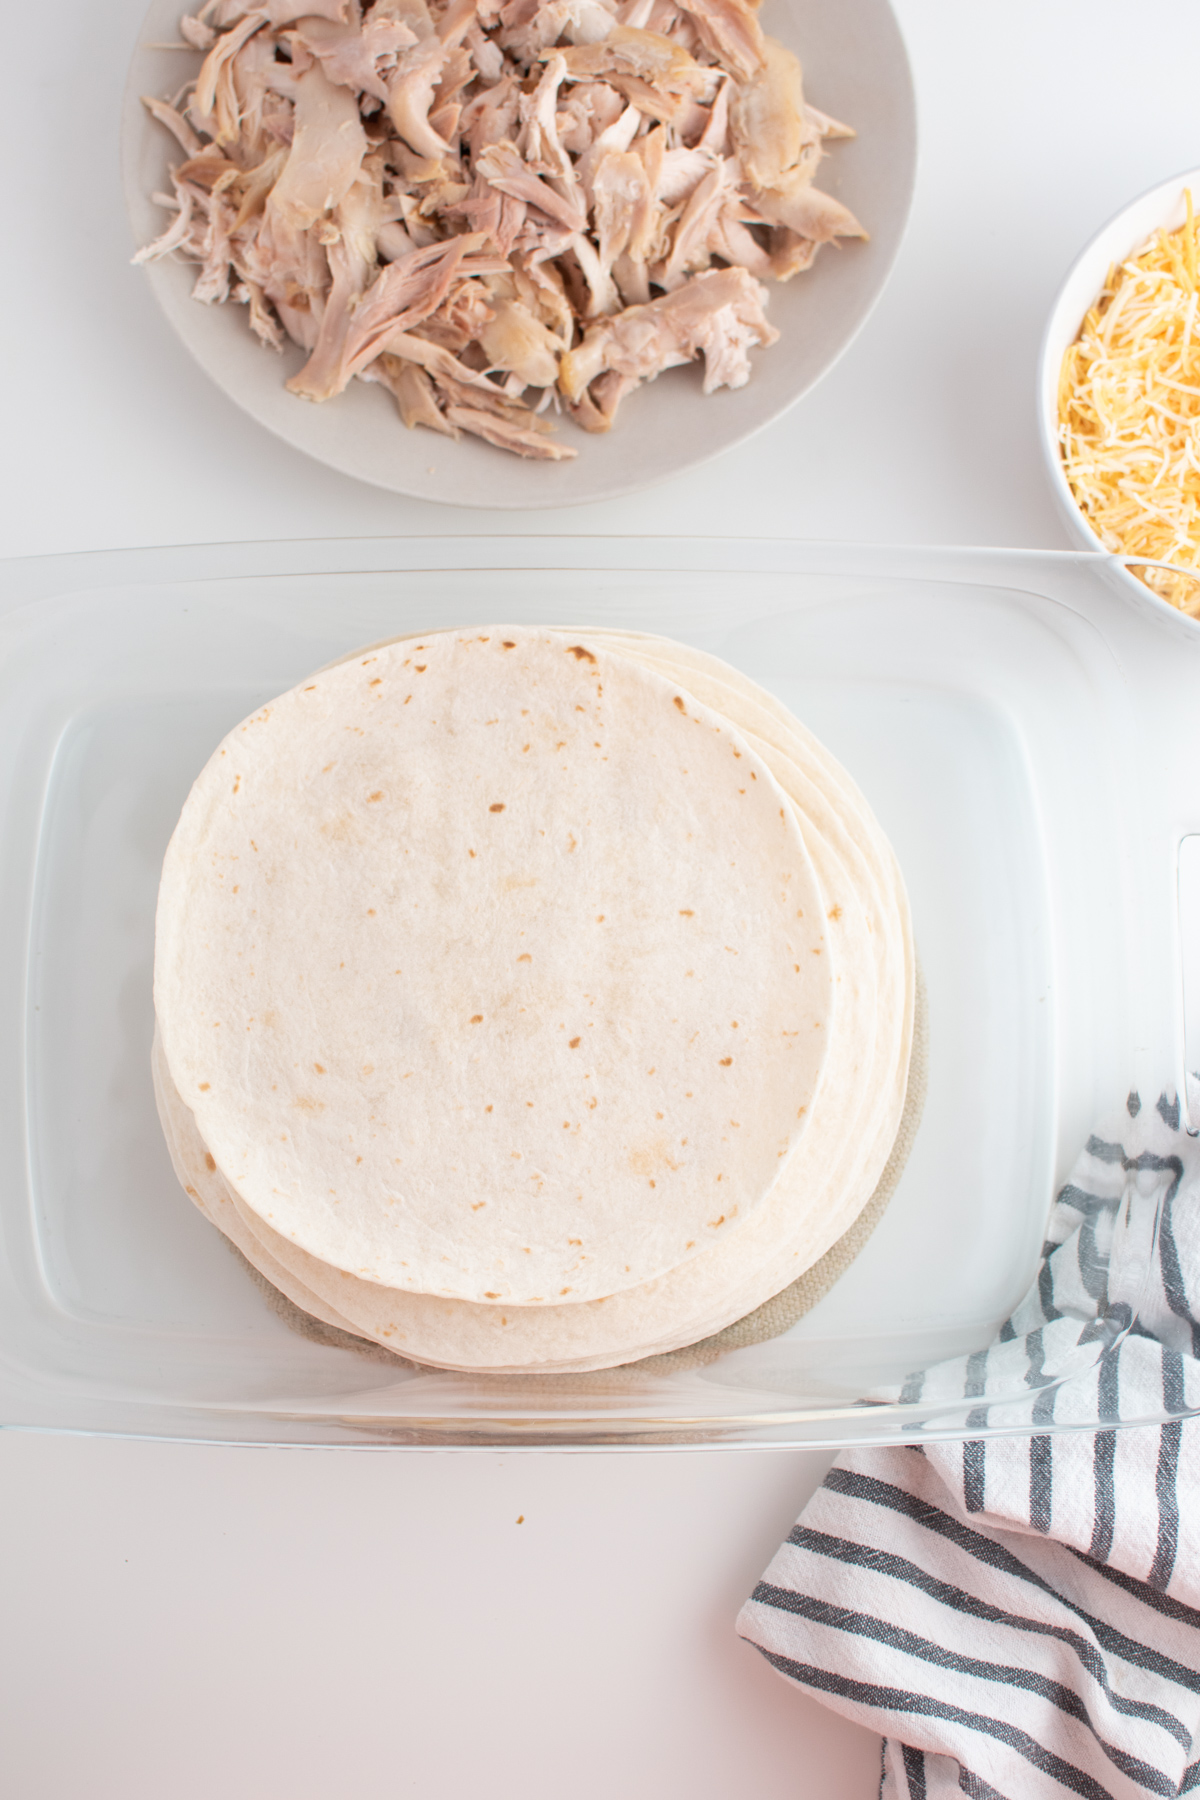 Large stack of warmed tortillas in glass pan next to prep bowls with cheese and chicken.